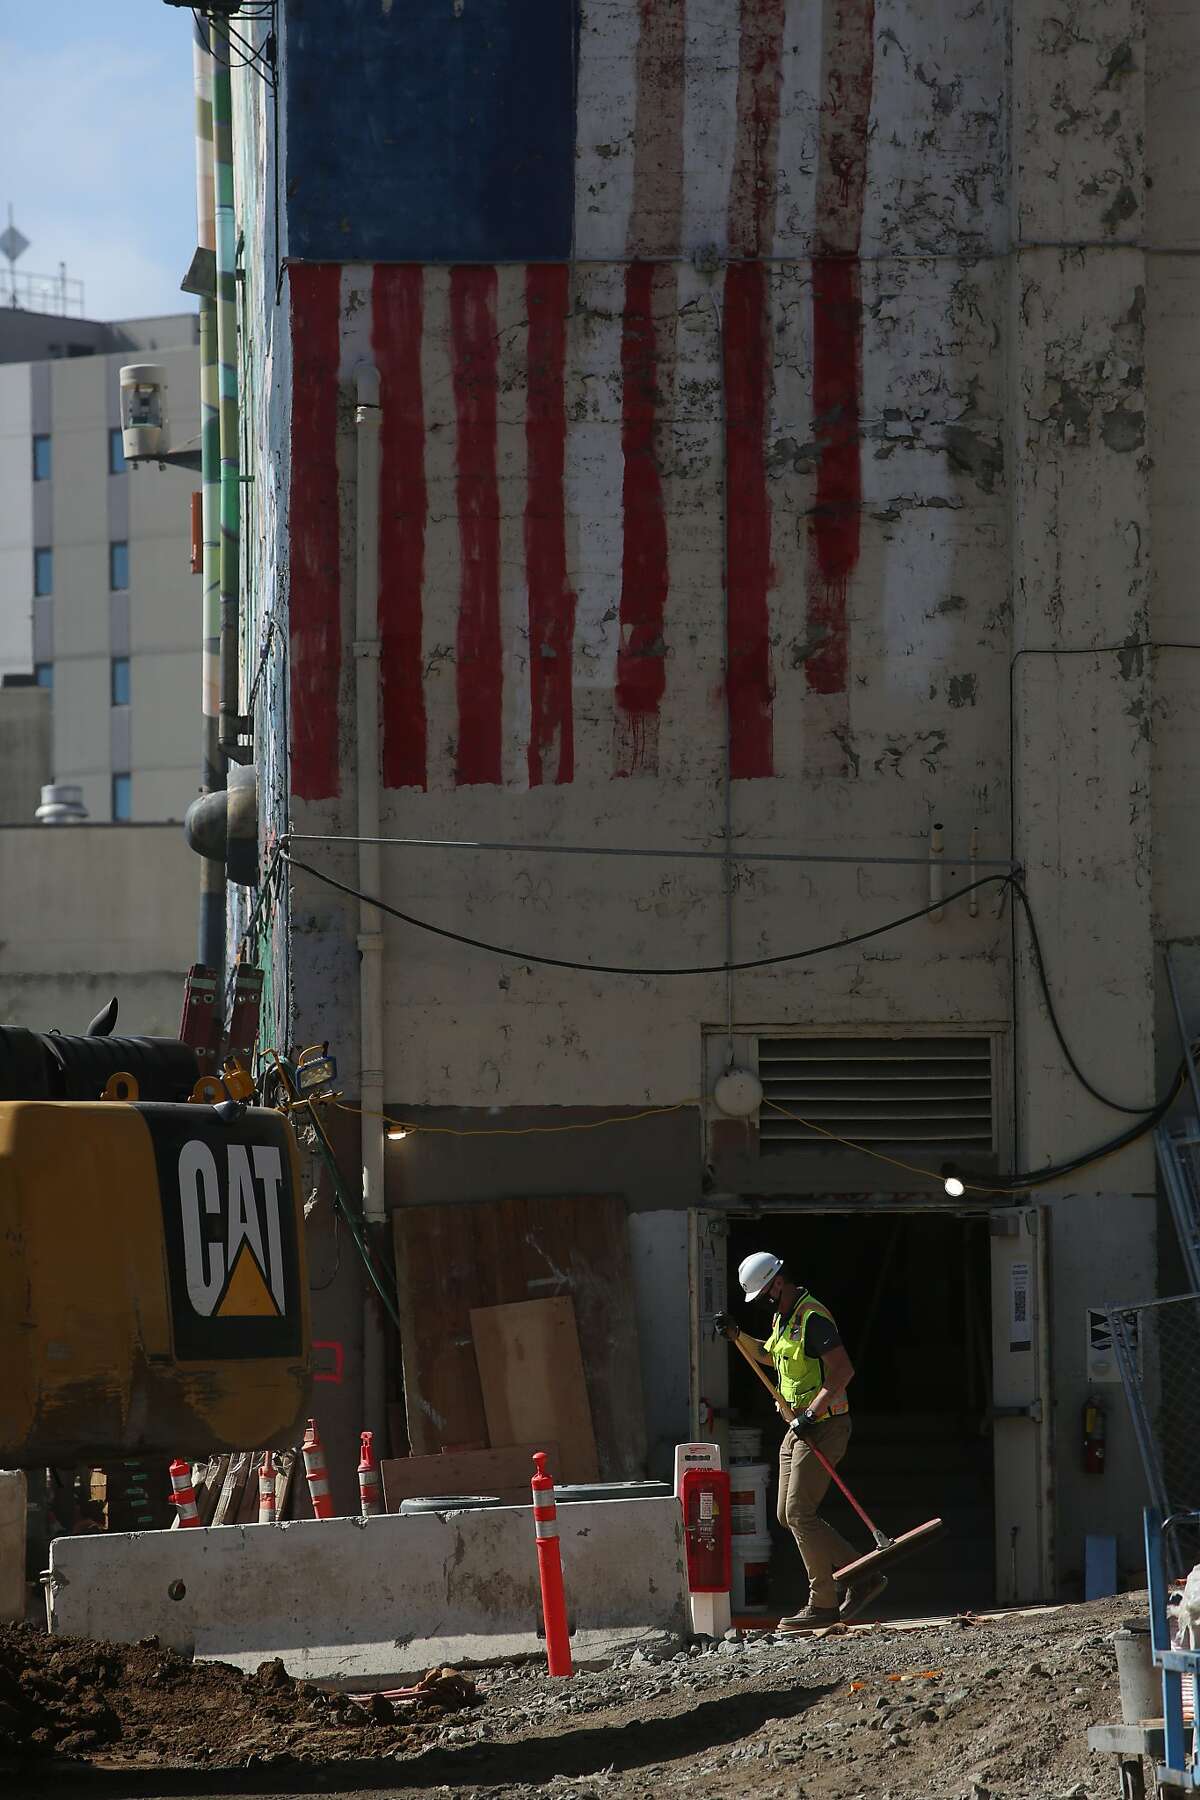 A worker sweeps outside the existing union hall at the site of the Plumbers and Pipefitters Local 38 project where 499 units of housing are being built in addition to the supportive housing complex at 53 Colton St.